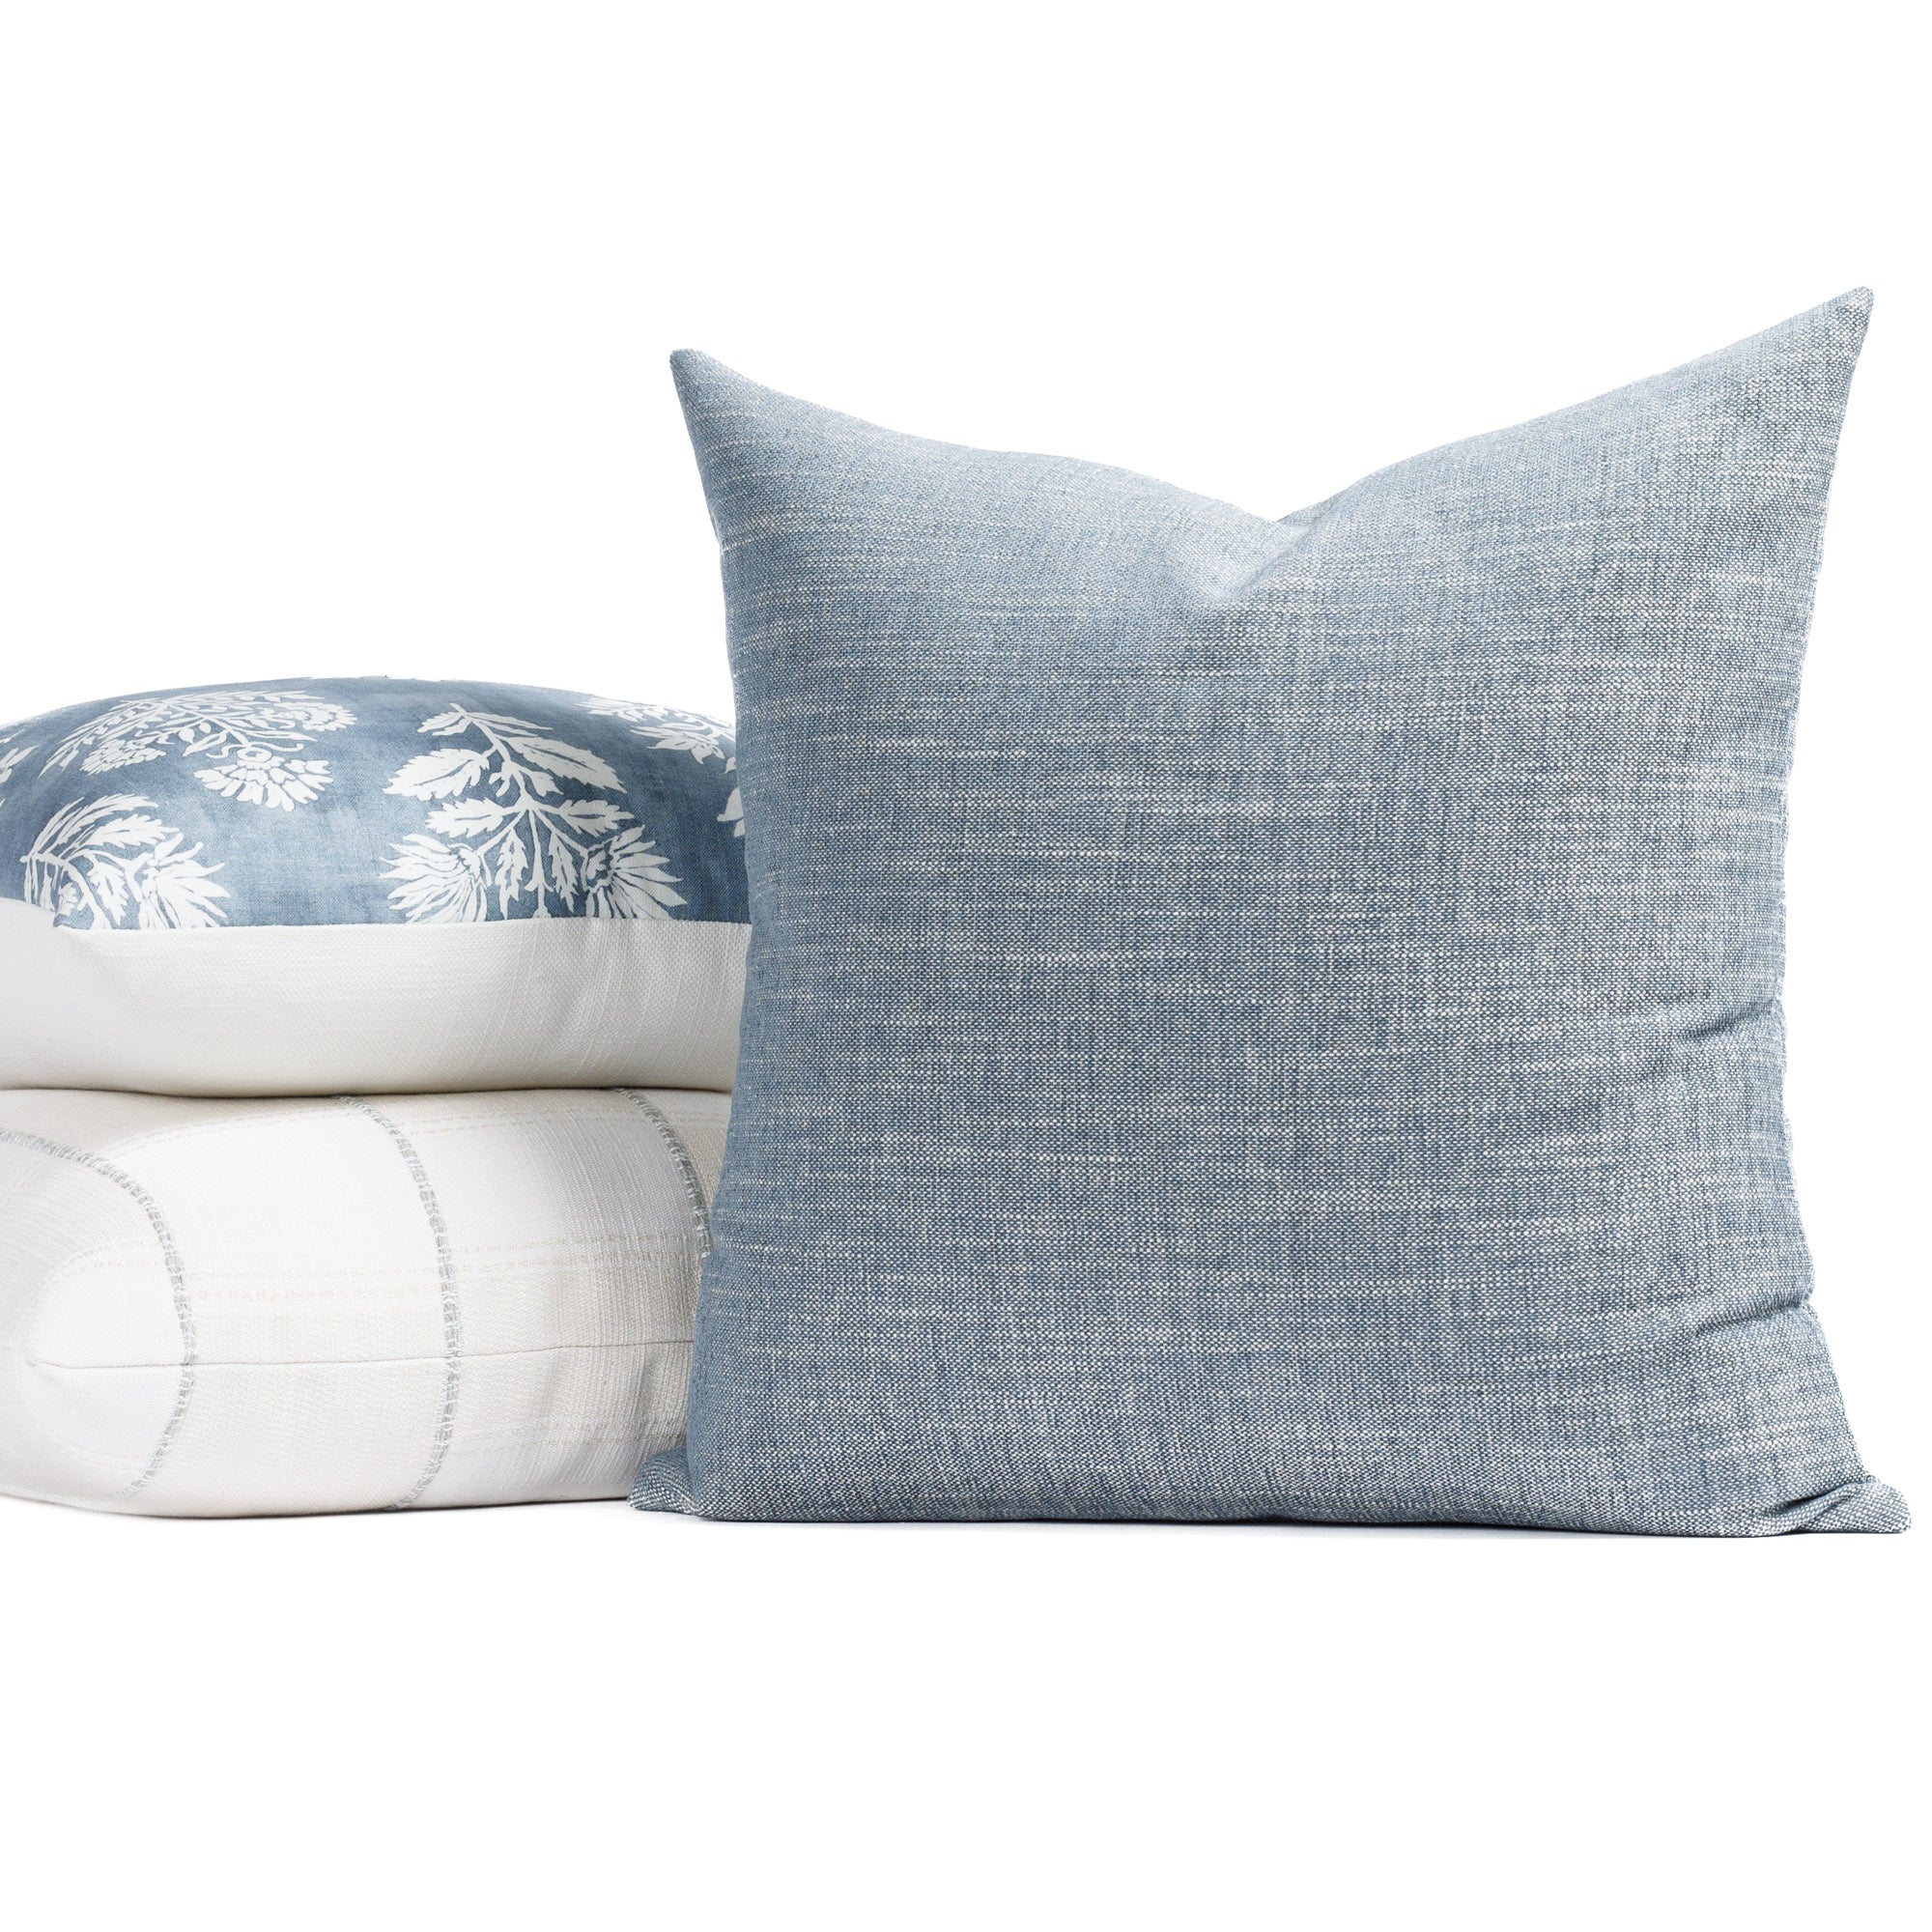 Modern blue and white throw pillows from Tonic Living